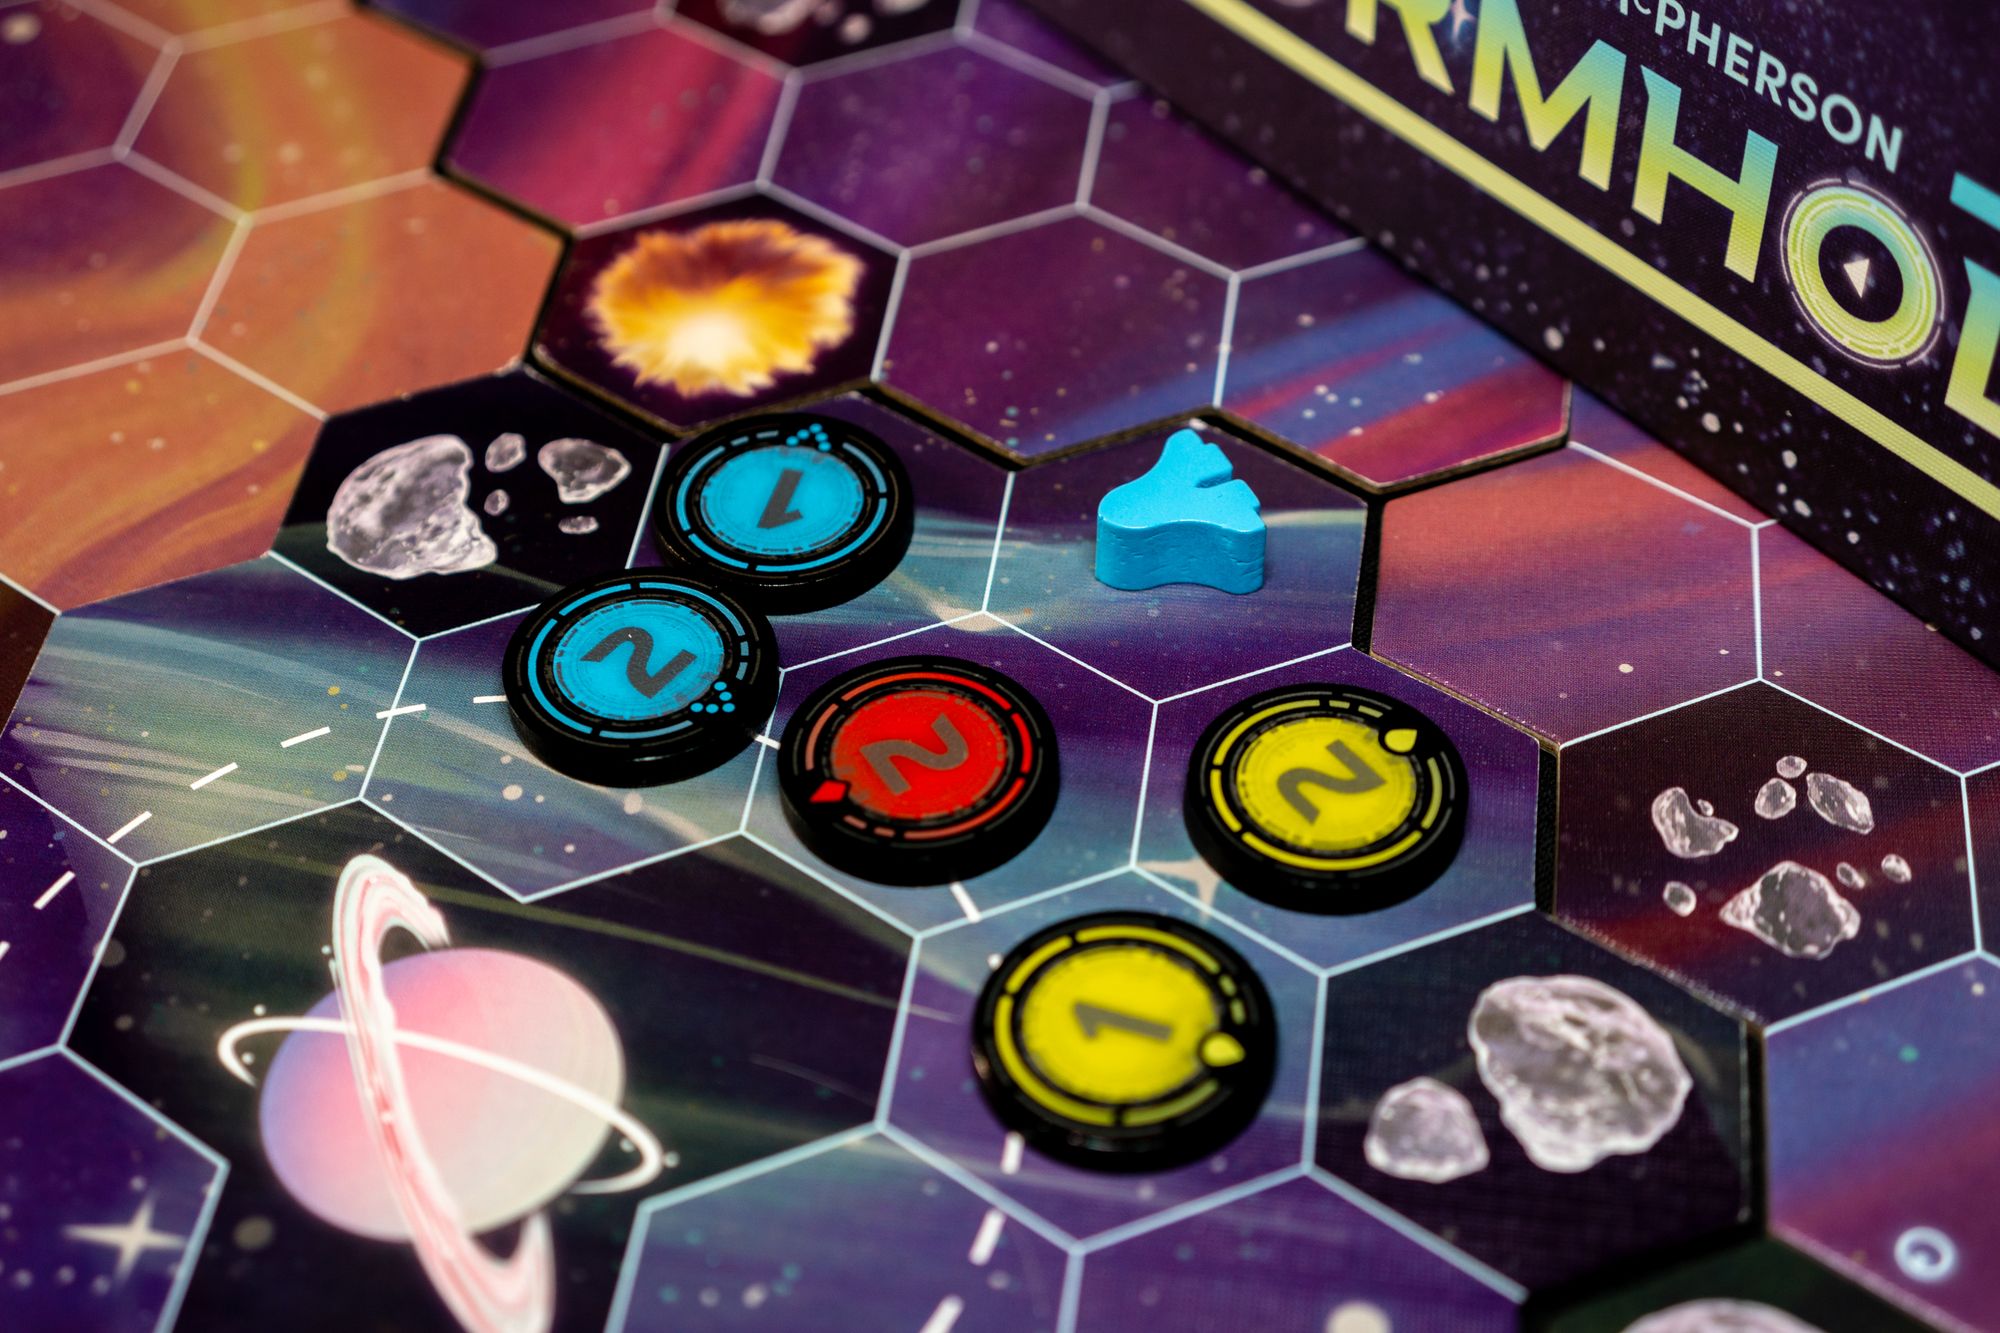 Review: Wormholes